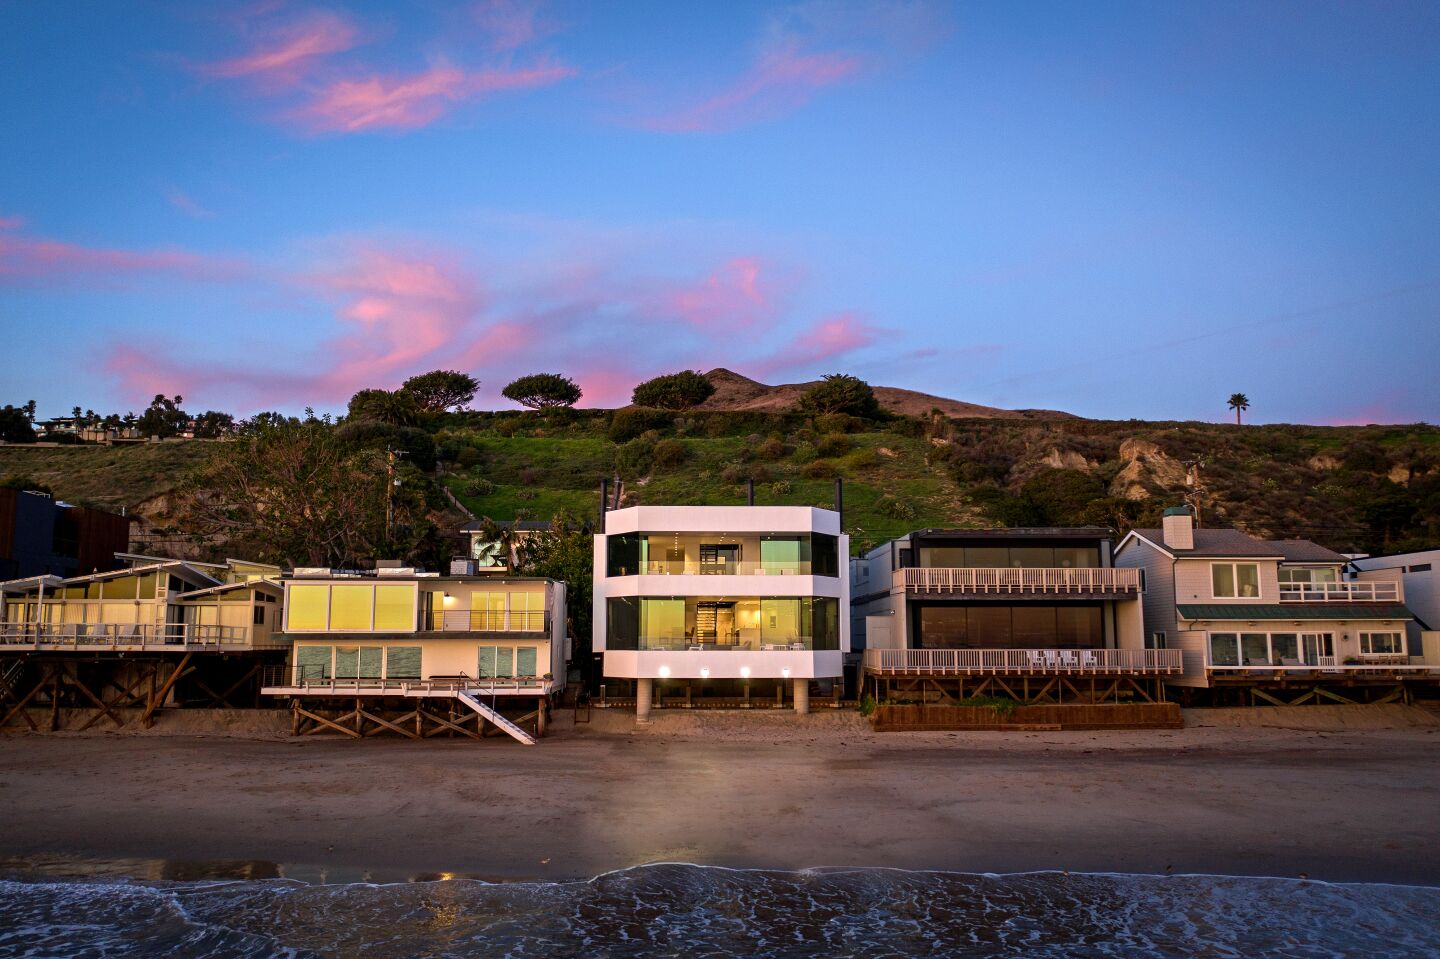 AFTER A Malibu beach house designed by noted moderist architect Jerrold Lomax gets a makeover from Lomax's onetime protege Zoltan E. Pali.